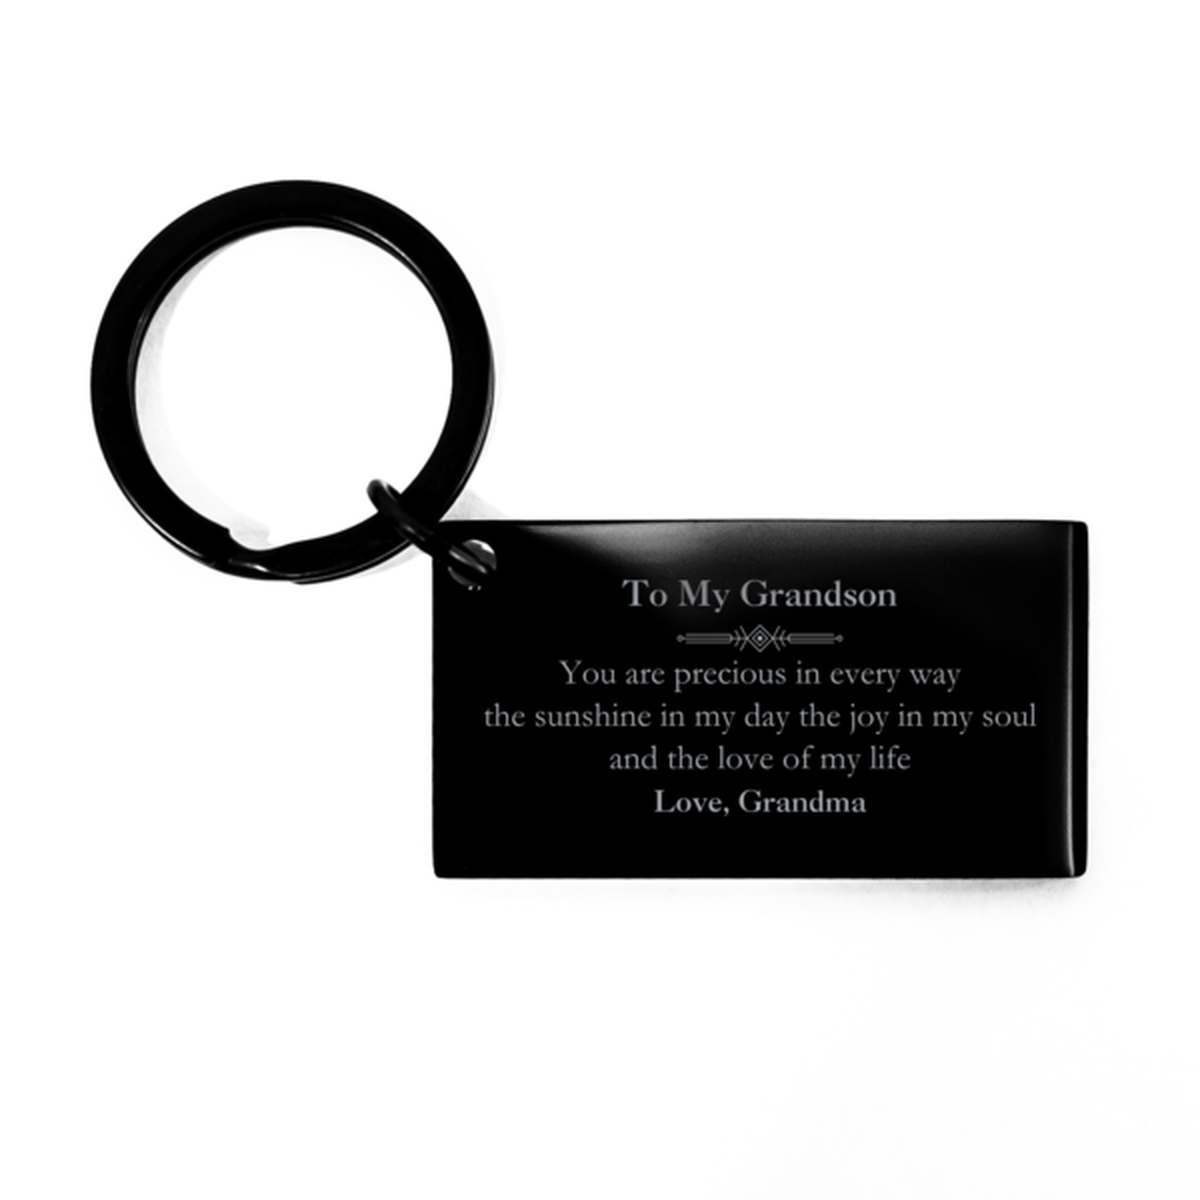 Graduation Gifts for Grandson Keychain Present from Grandma, Christmas Grandson Birthday Gifts Grandson You are precious in every way the sunshine in my day. Love, Grandma